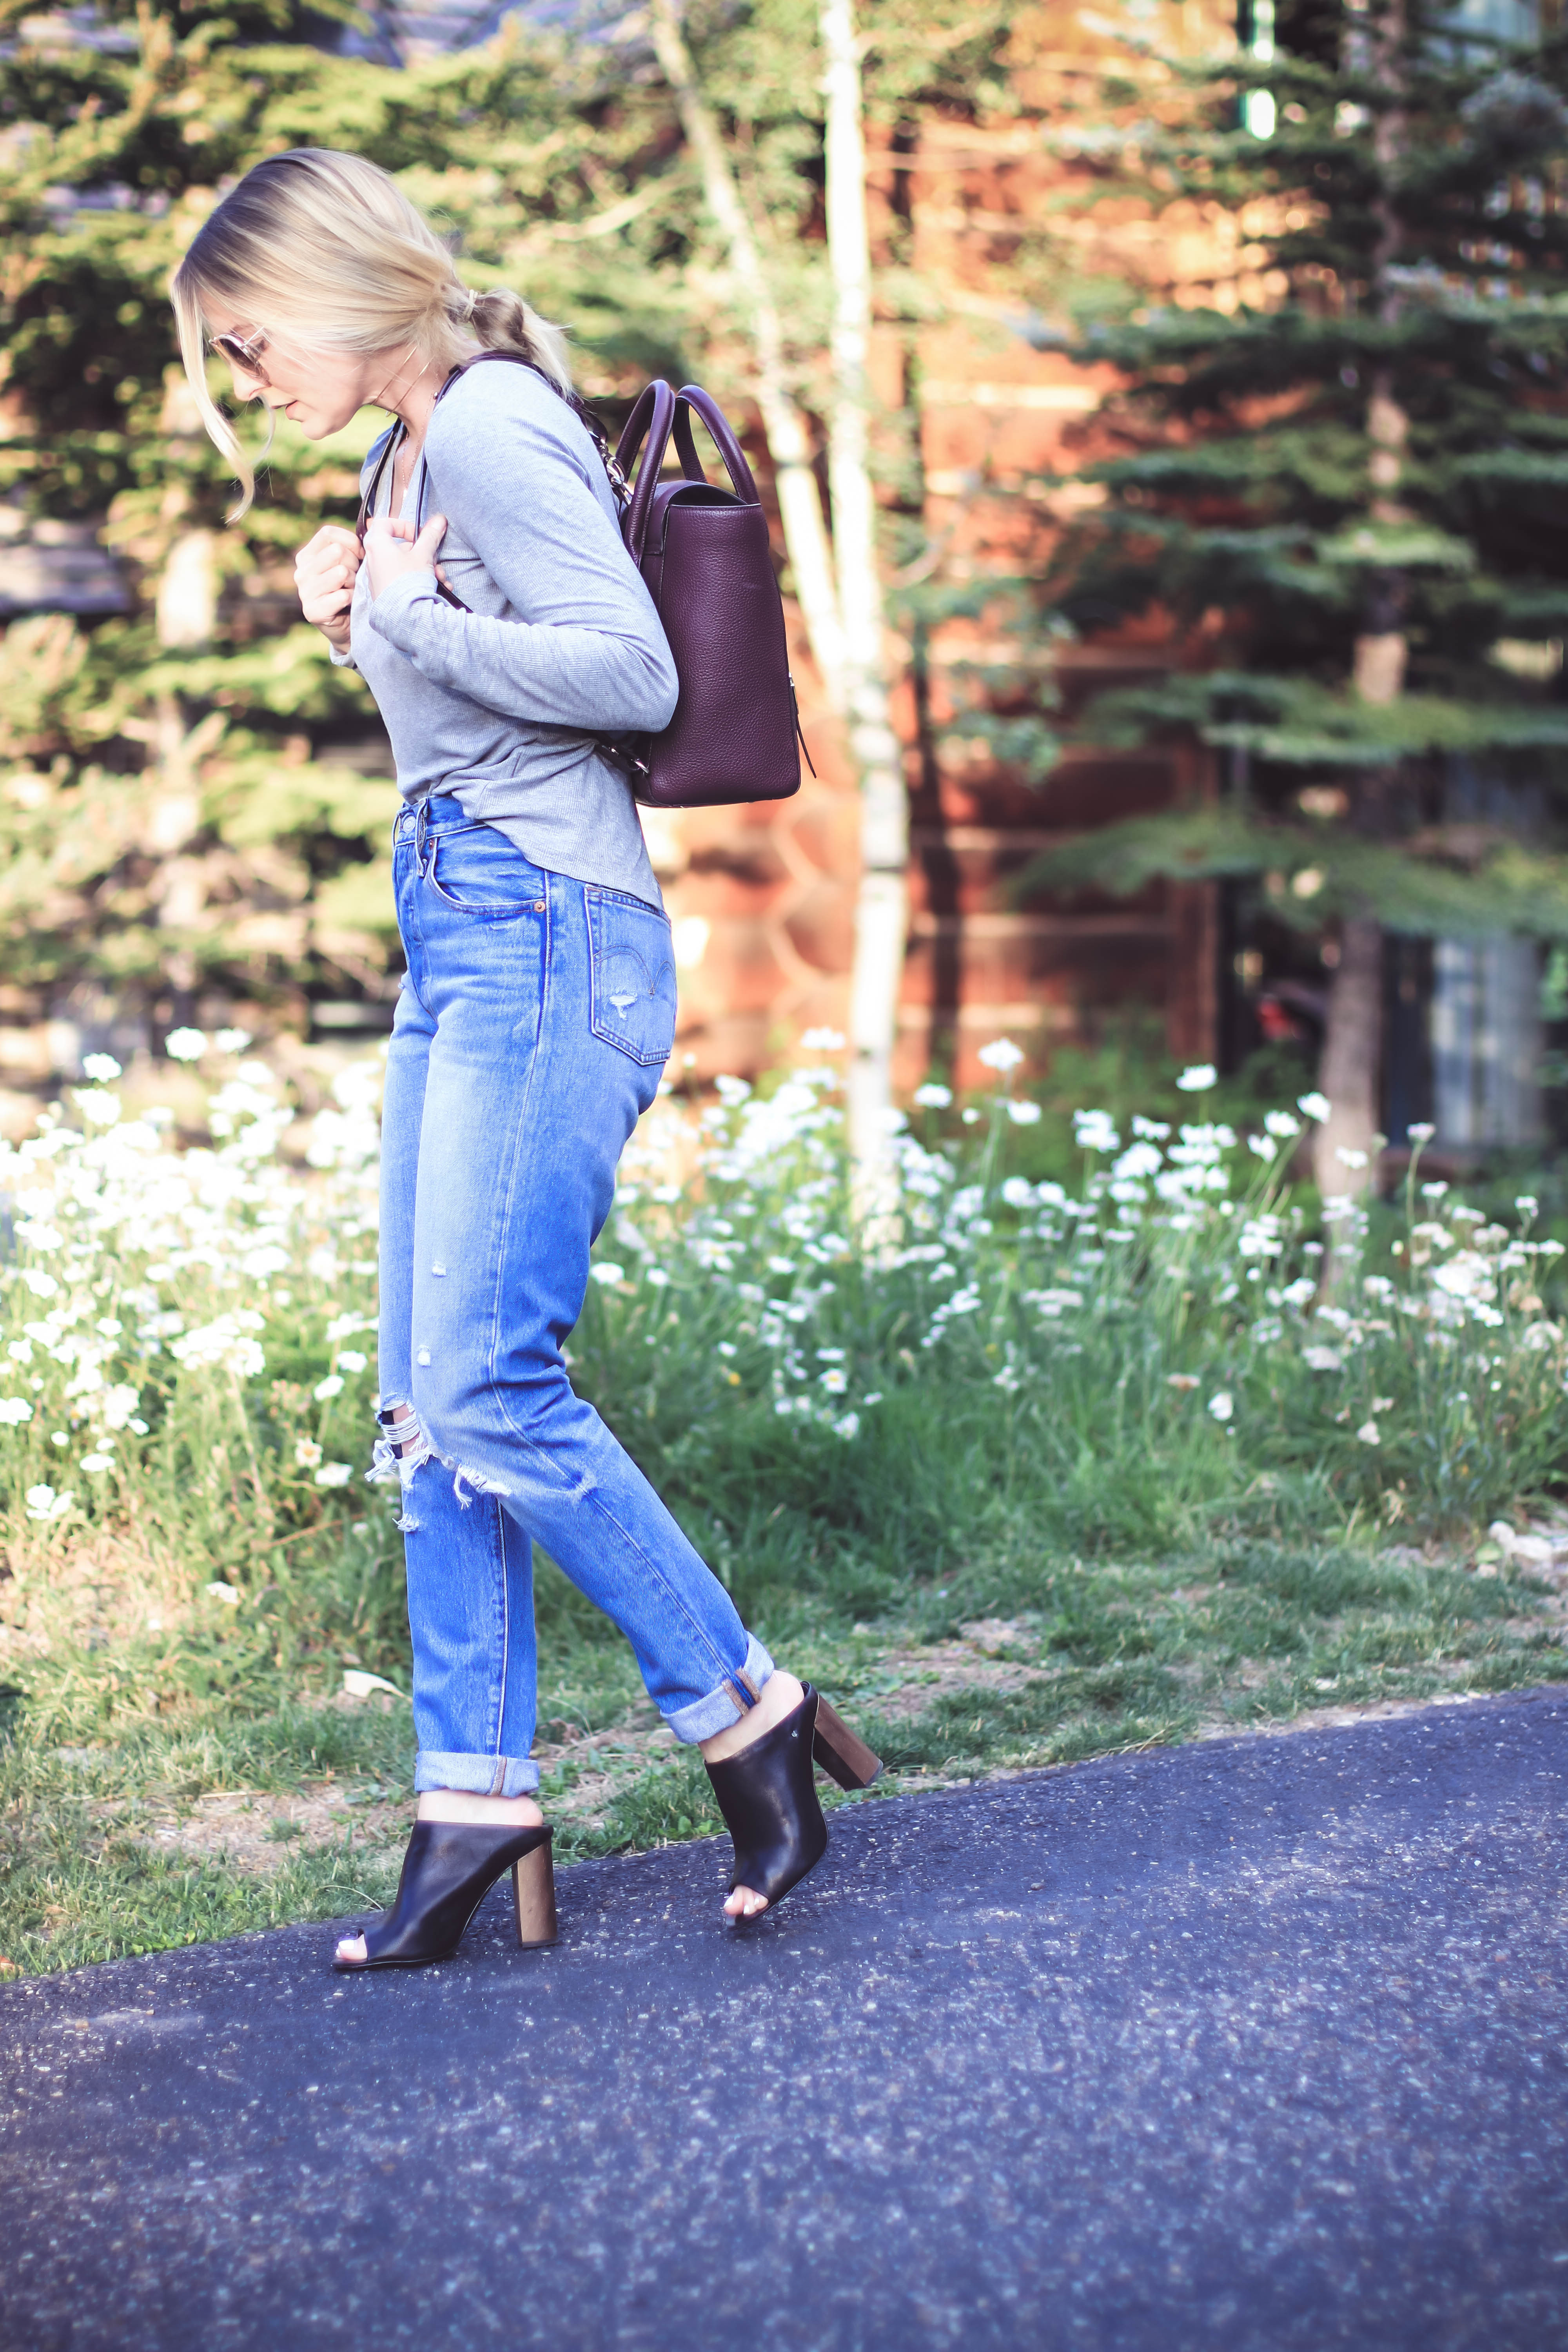 Chic Backpacks for grown ups, this one by Henri Bendel, with Levi's jeans, fashion blogger, Erin Busbee of Busbee Style in Telluride, Colorado